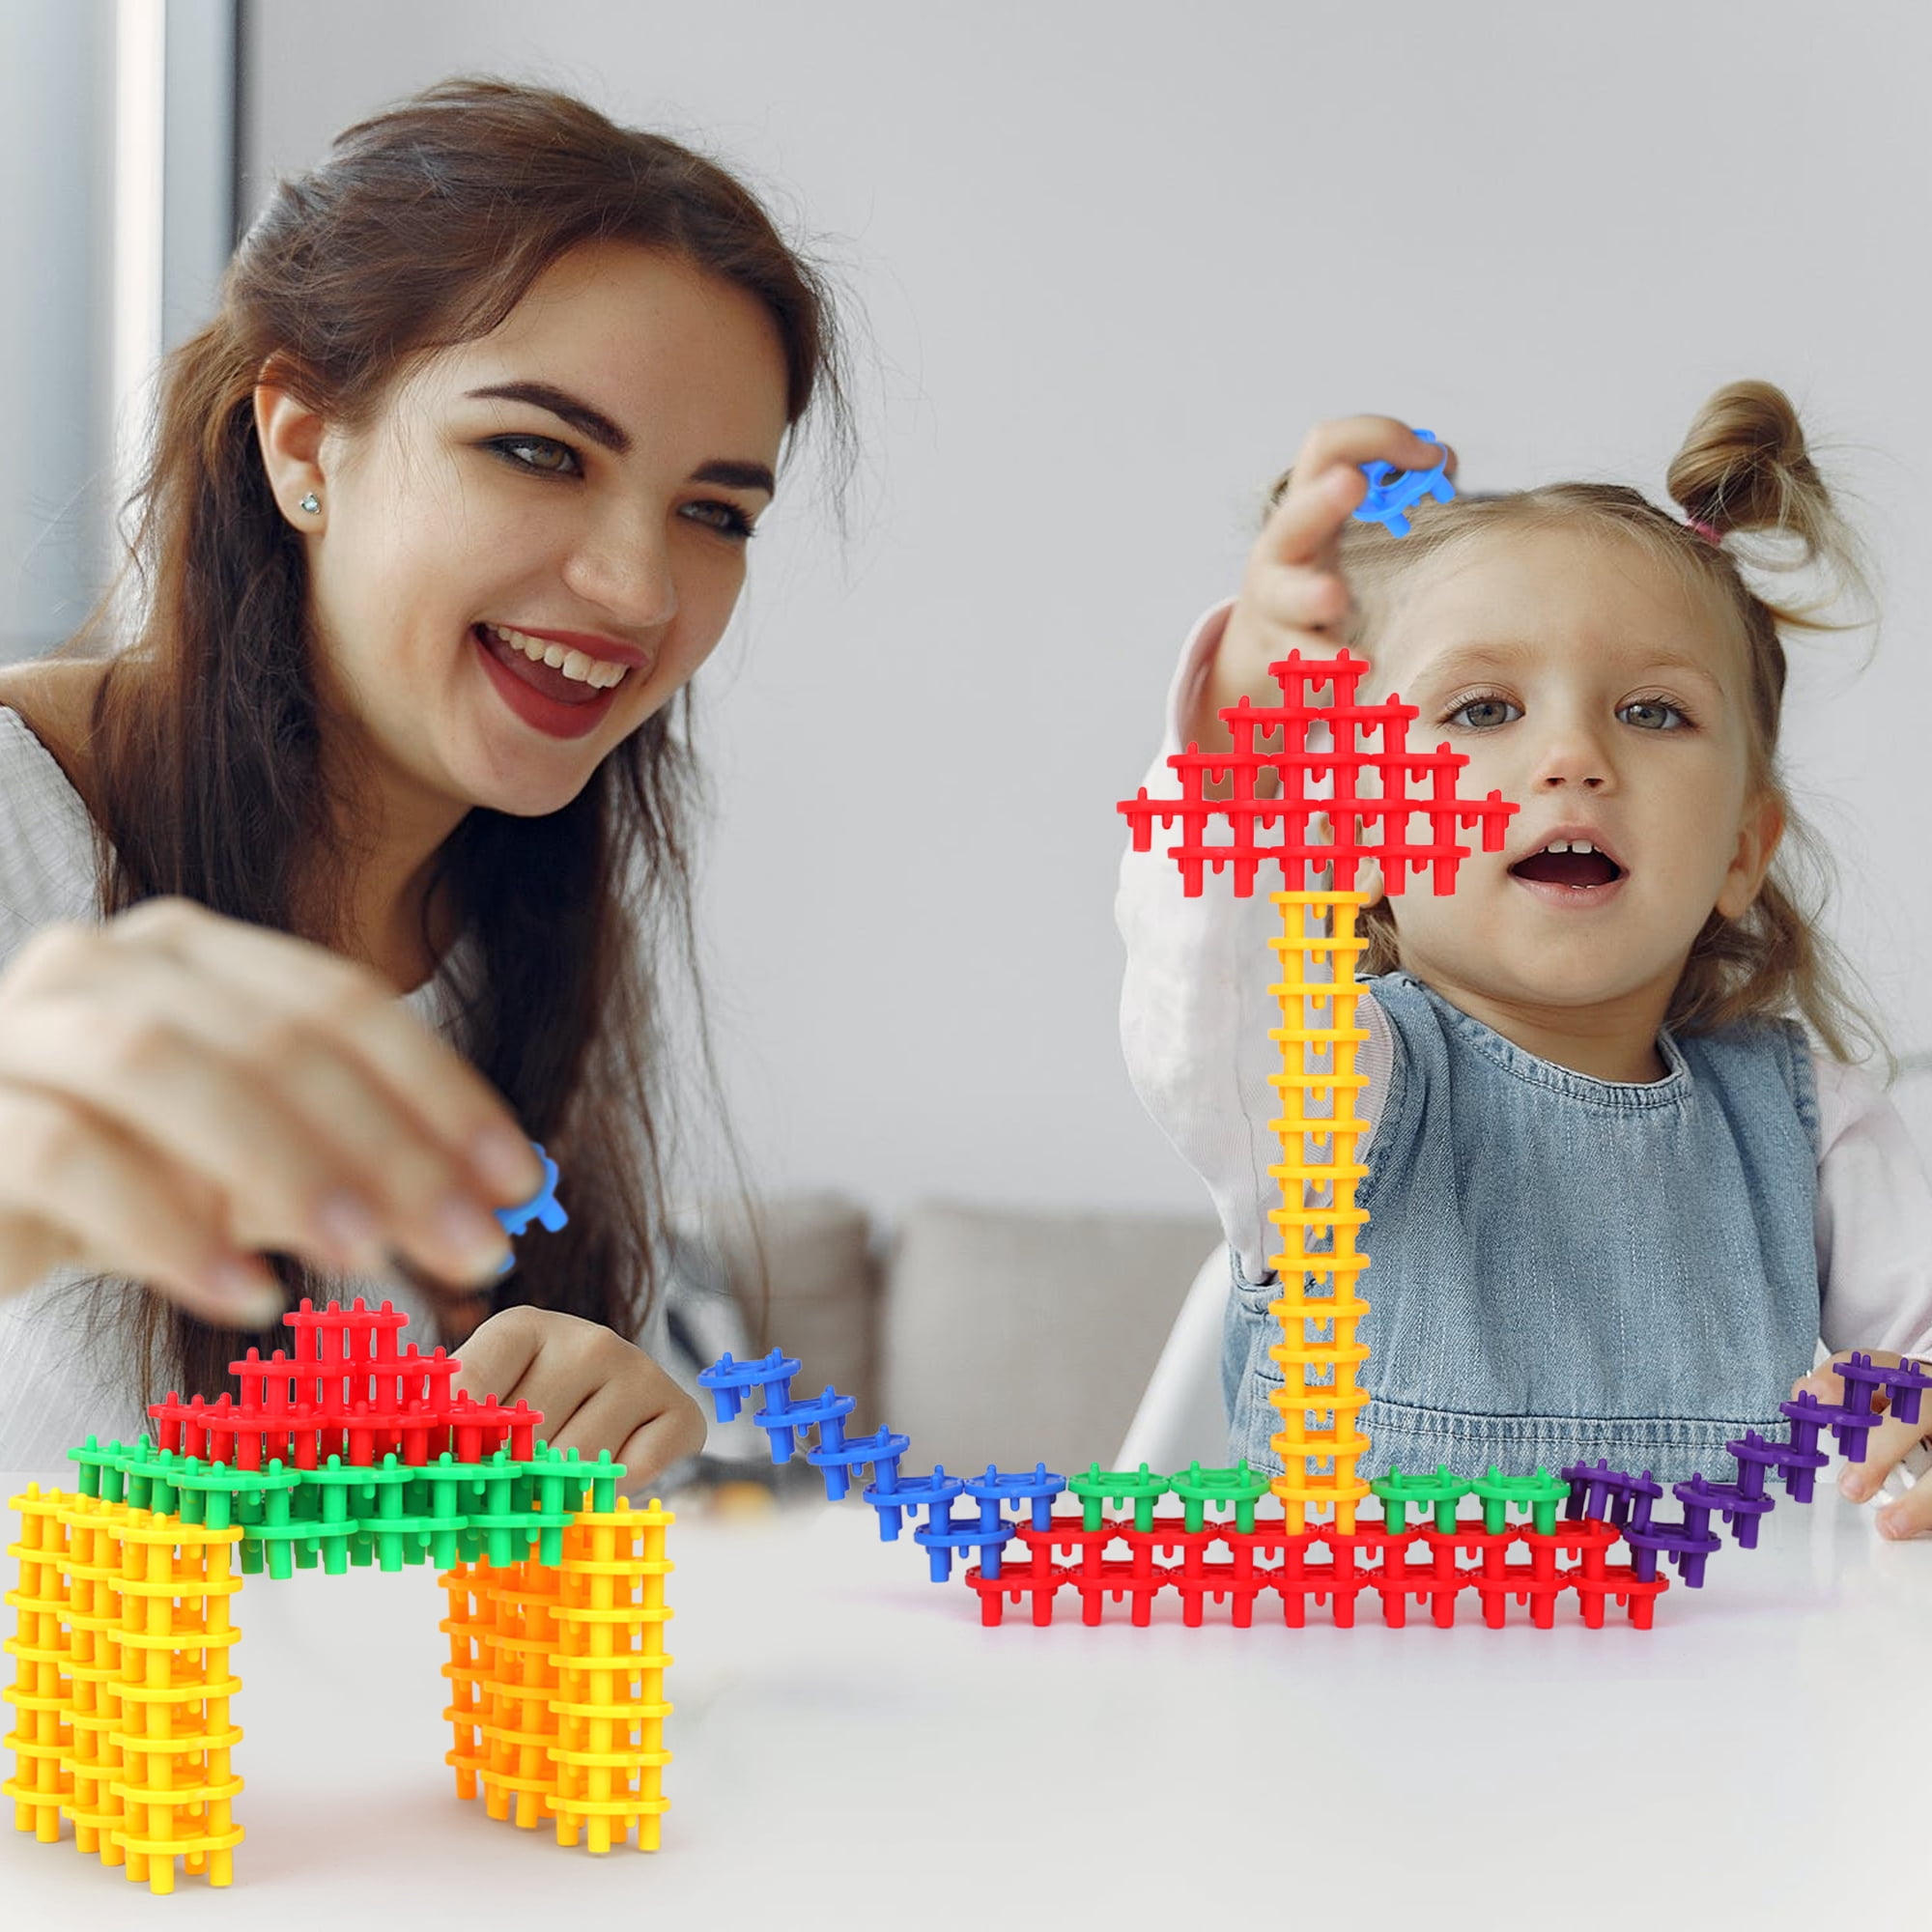 Play Build Platformers Building Plastic Toys. STEM Building Toy for School, Toddler Play, Activities, Fine Motor Skill Development. Snap Together Toys Ages 3+.